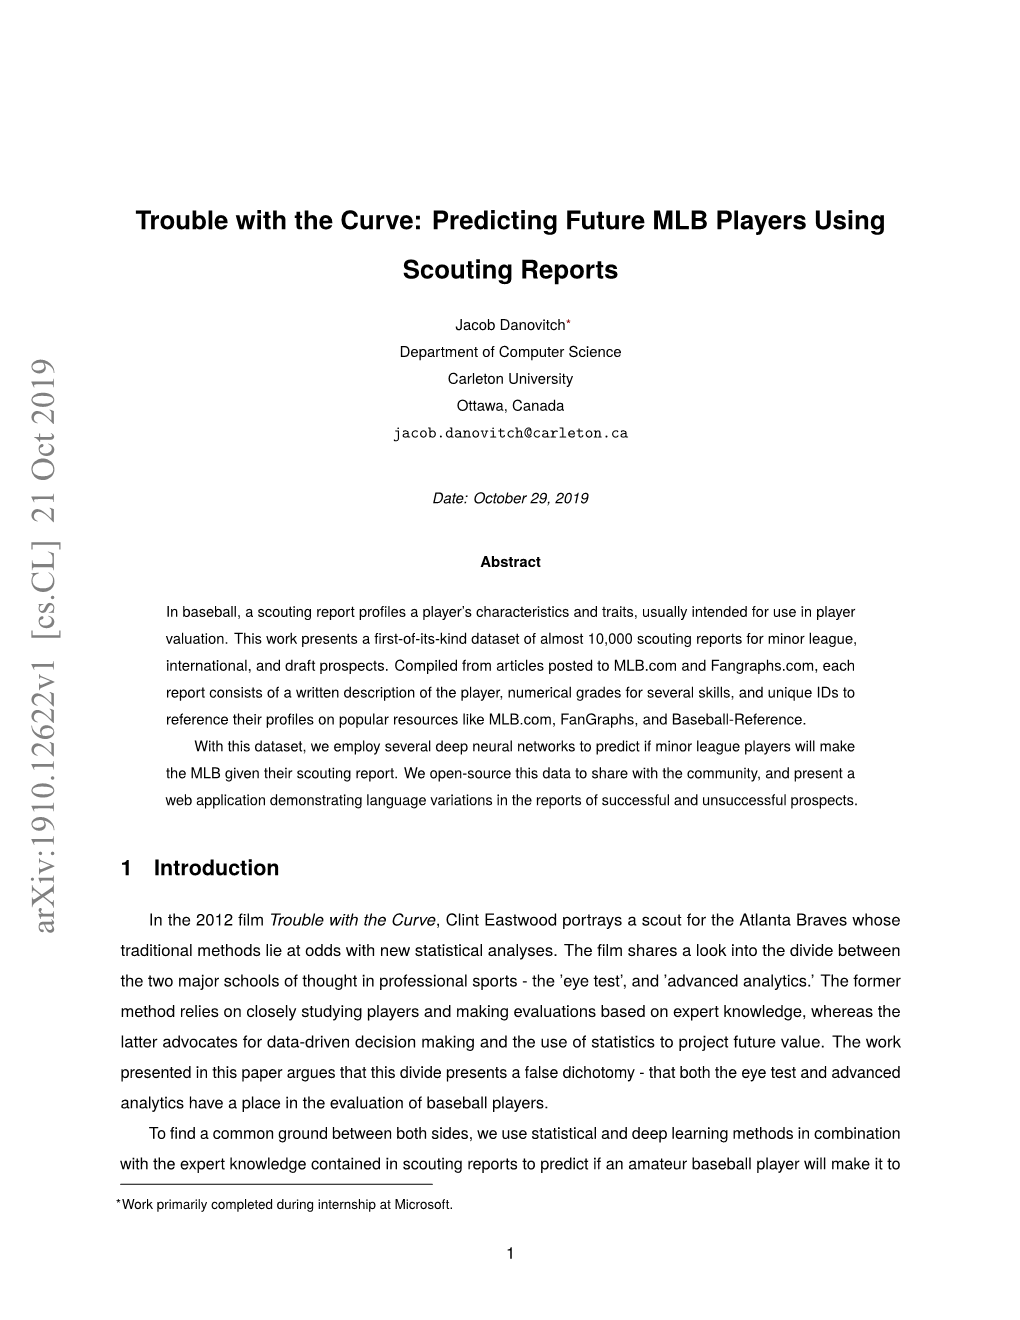 Trouble with the Curve: Predicting Future MLB Players Using Scouting Reports